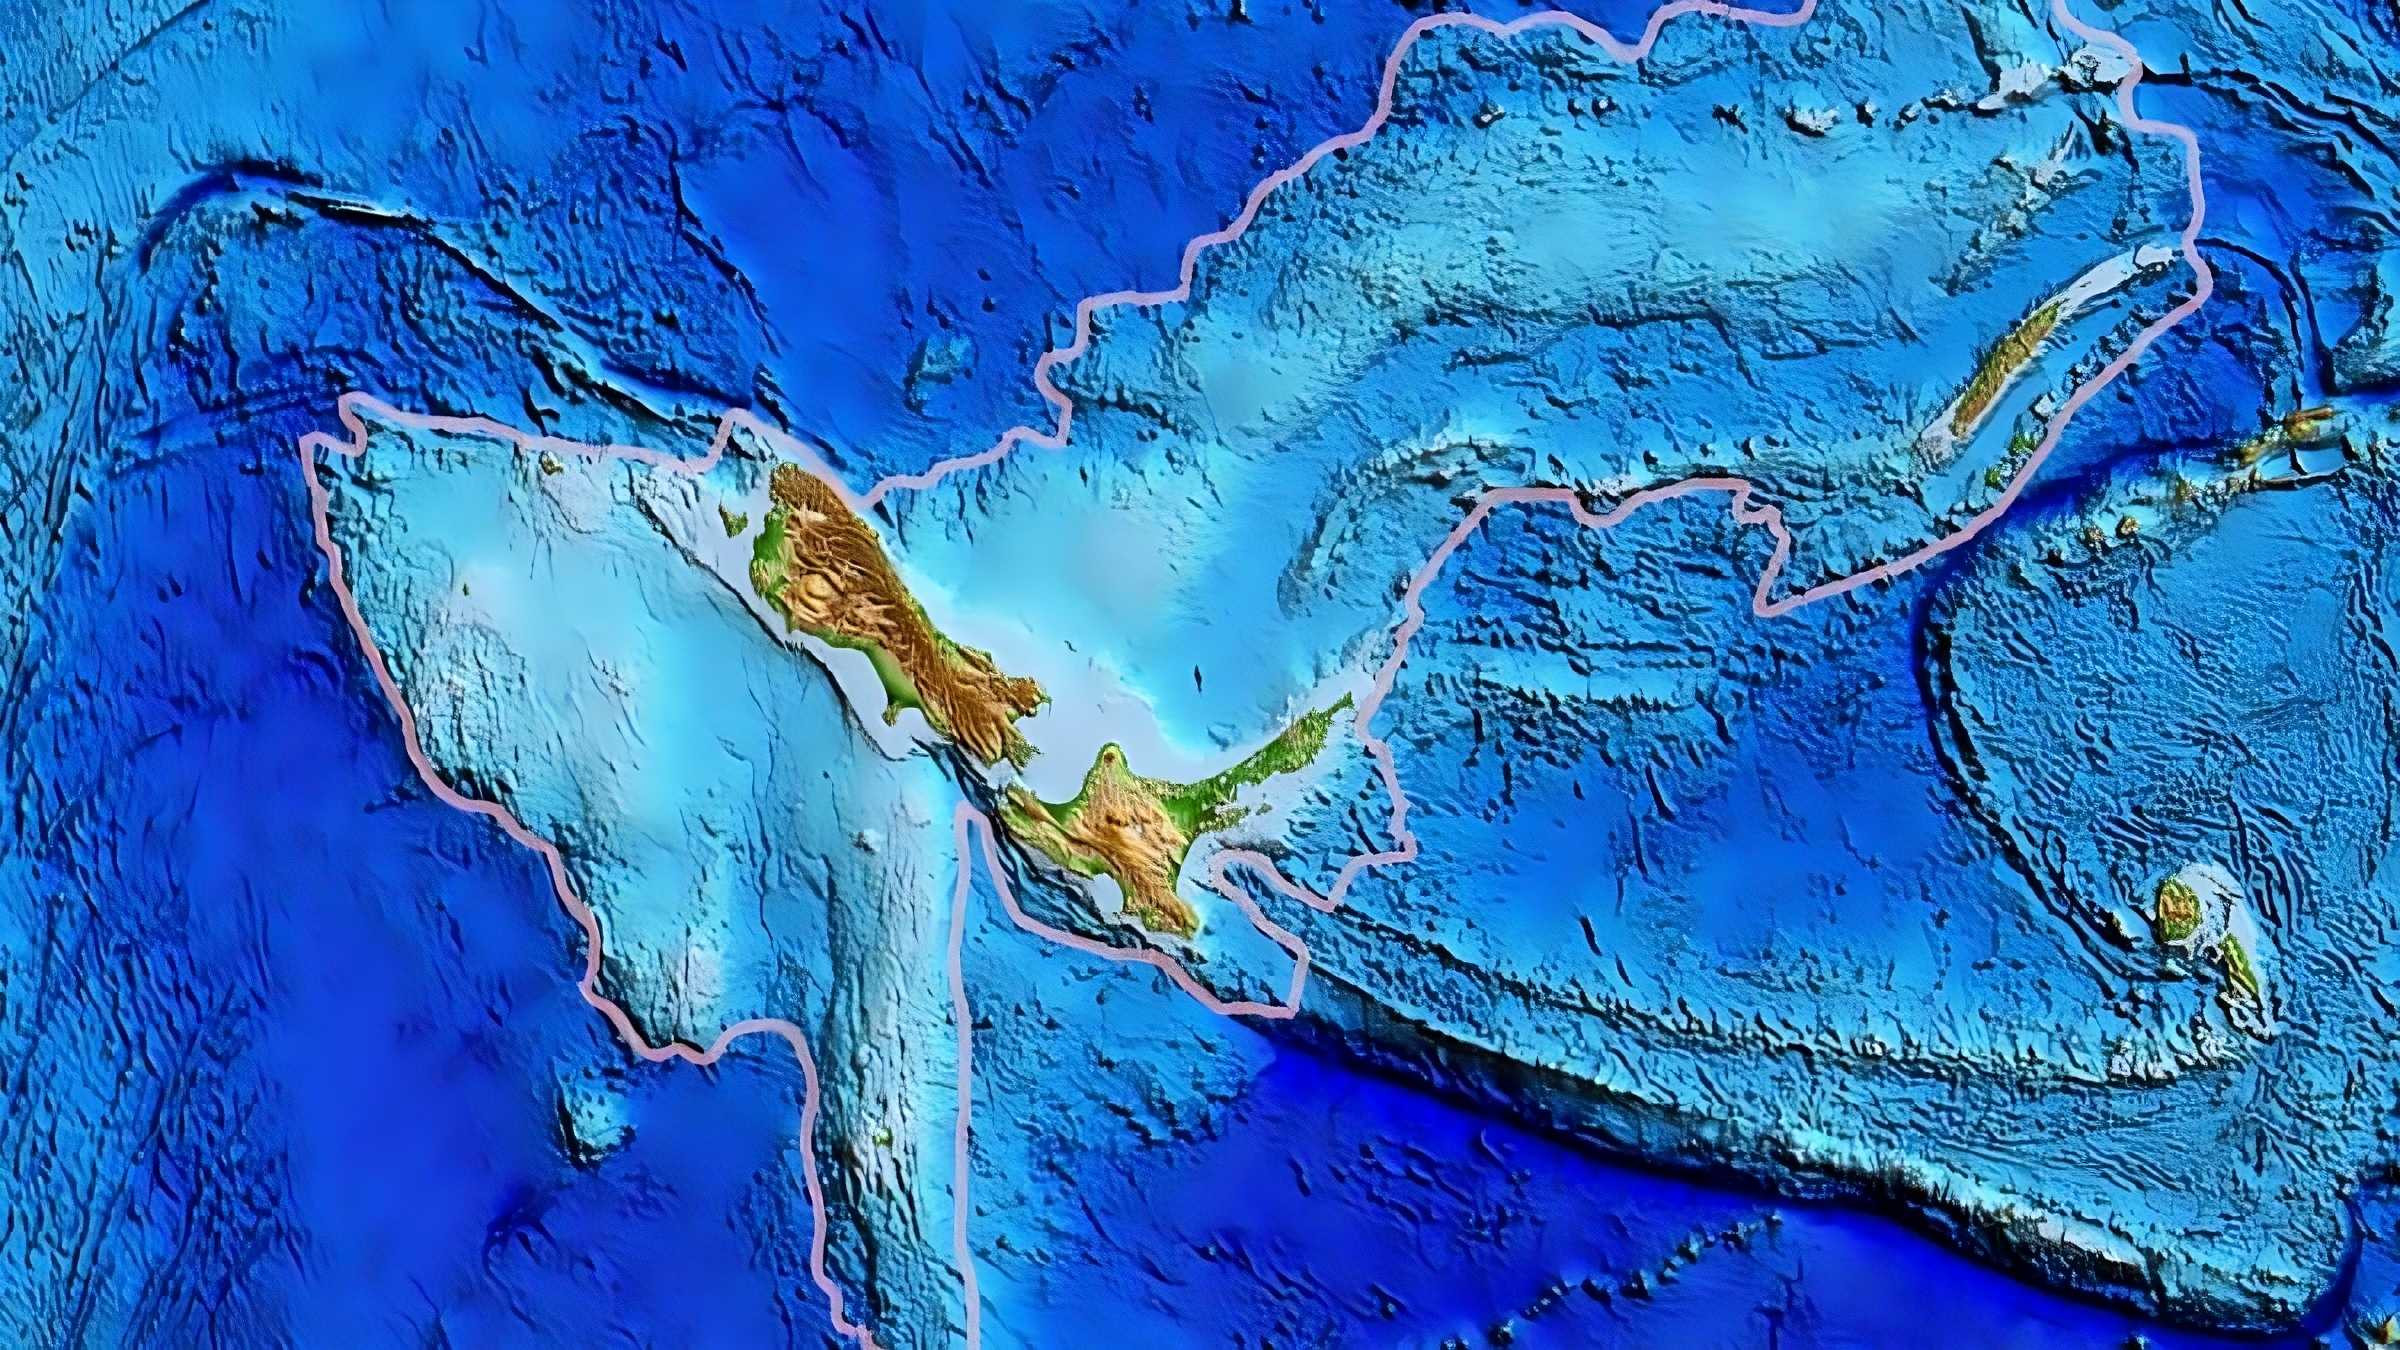 Topography of the continent of Zealandia